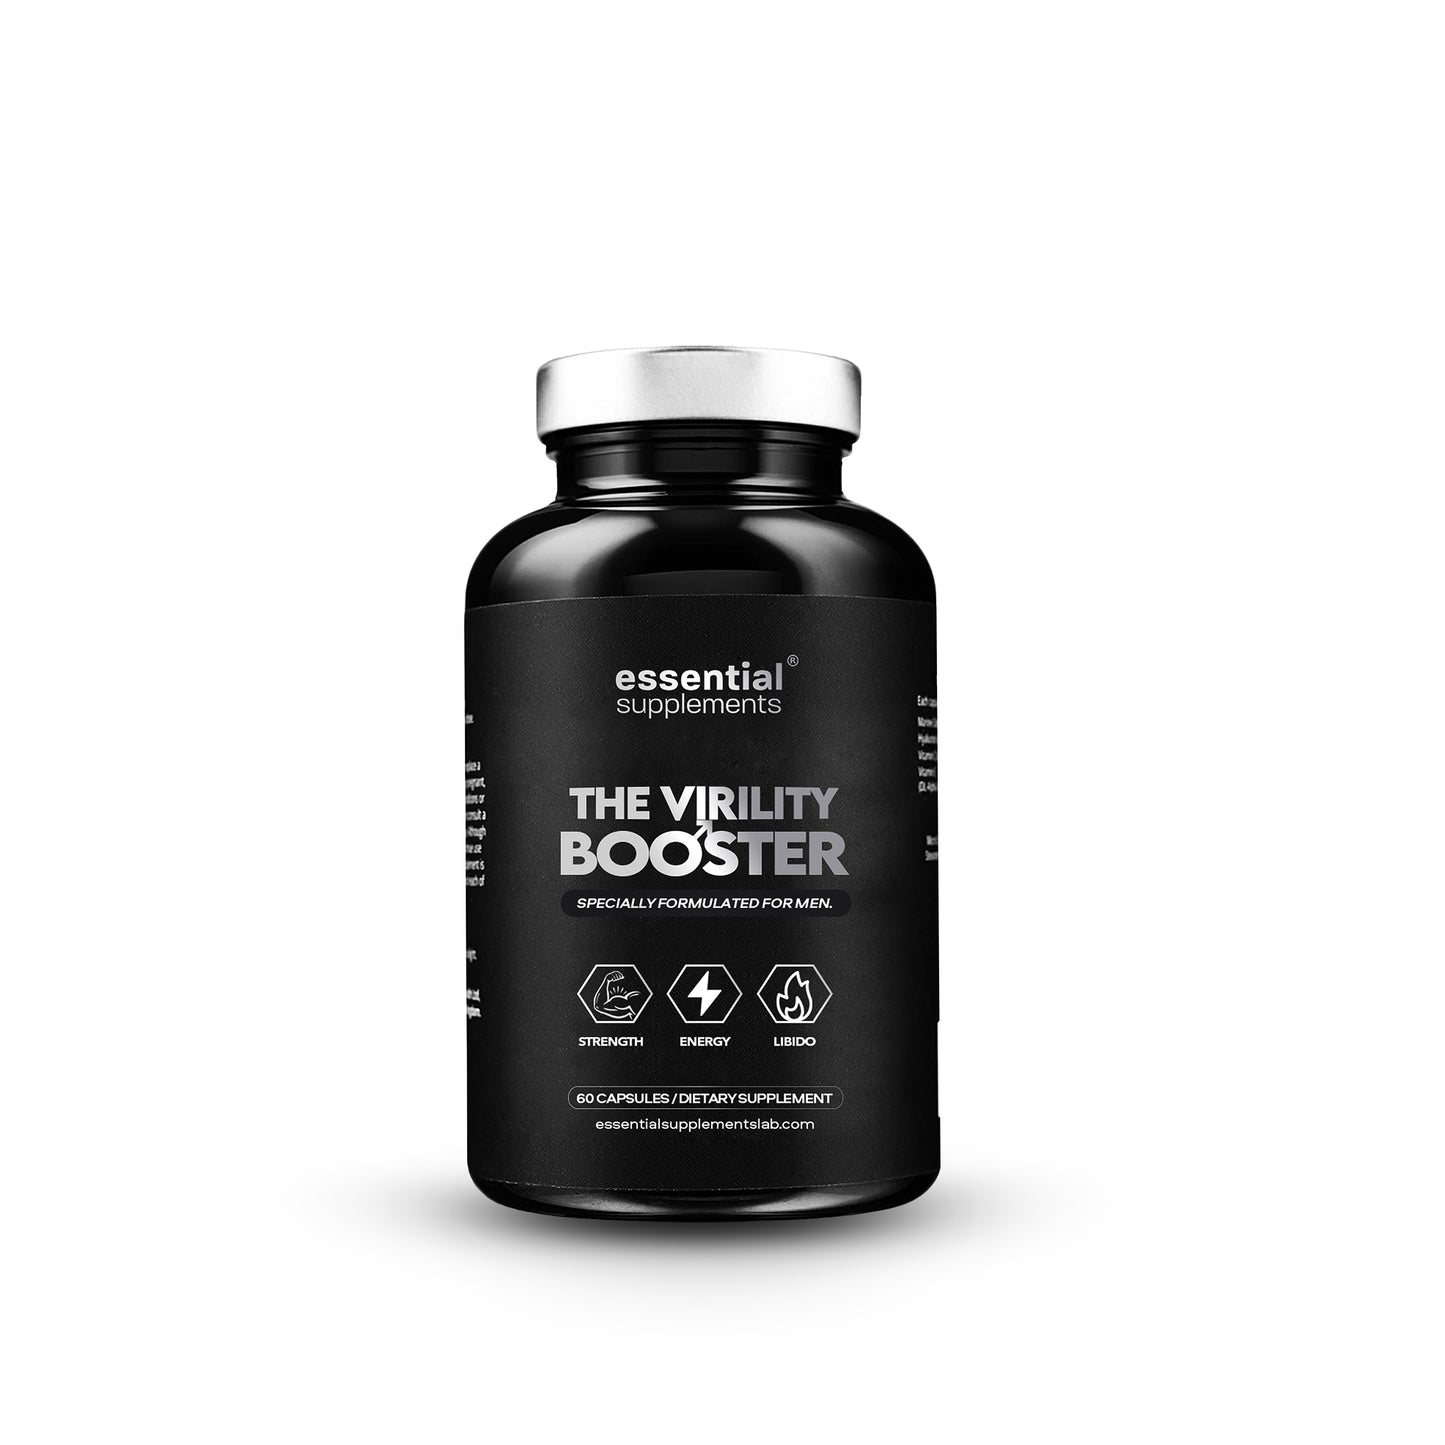 The Virility Booster